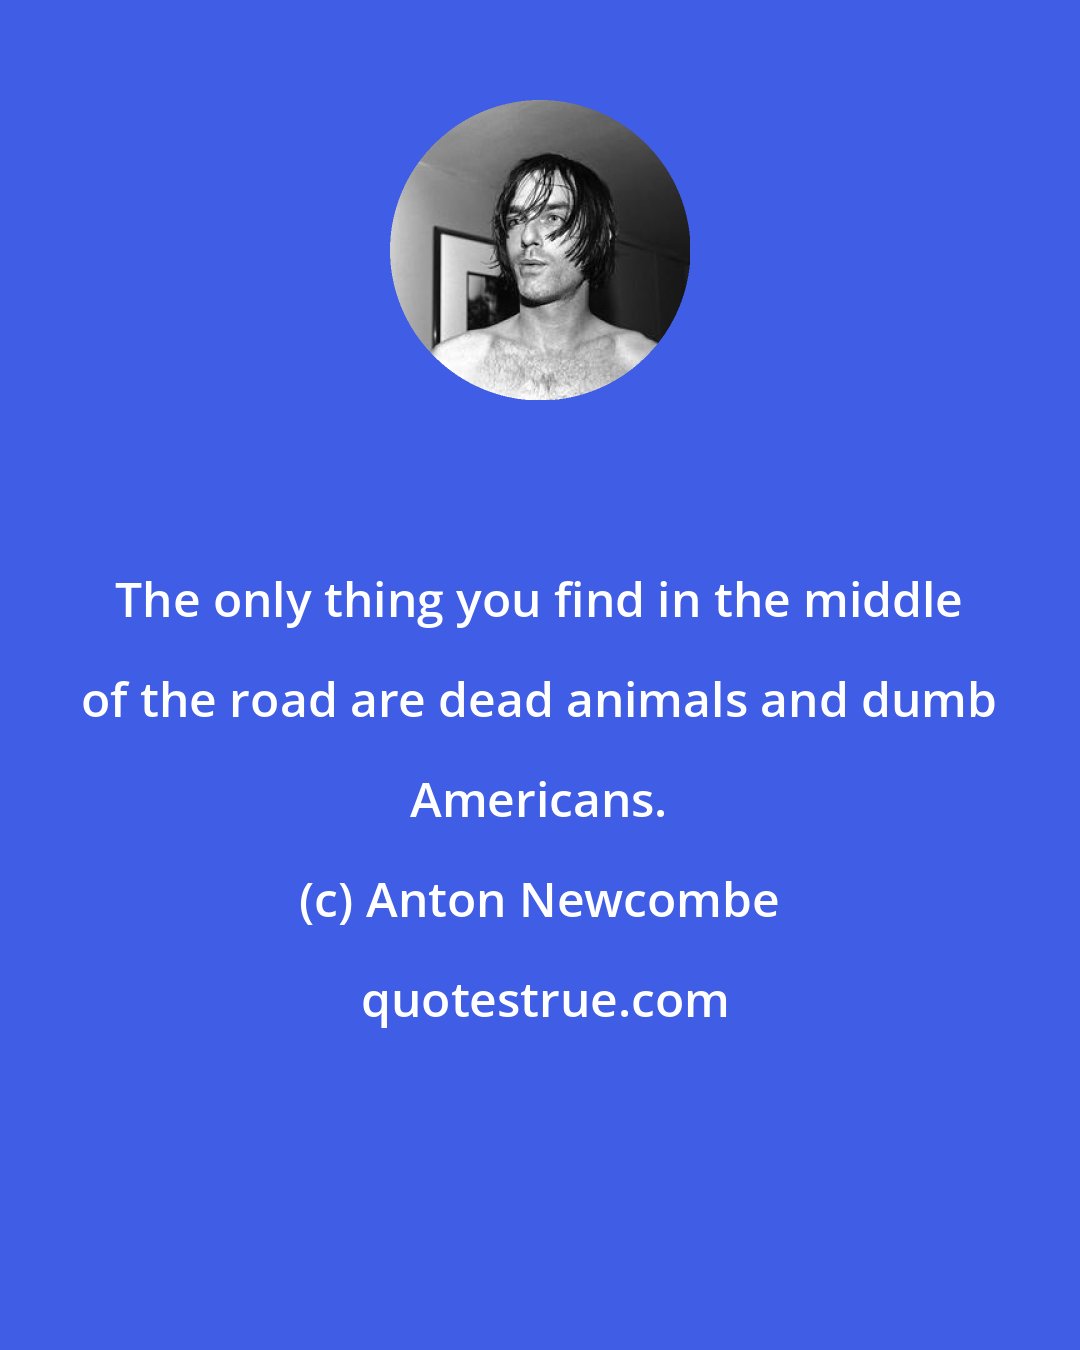 Anton Newcombe: The only thing you find in the middle of the road are dead animals and dumb Americans.